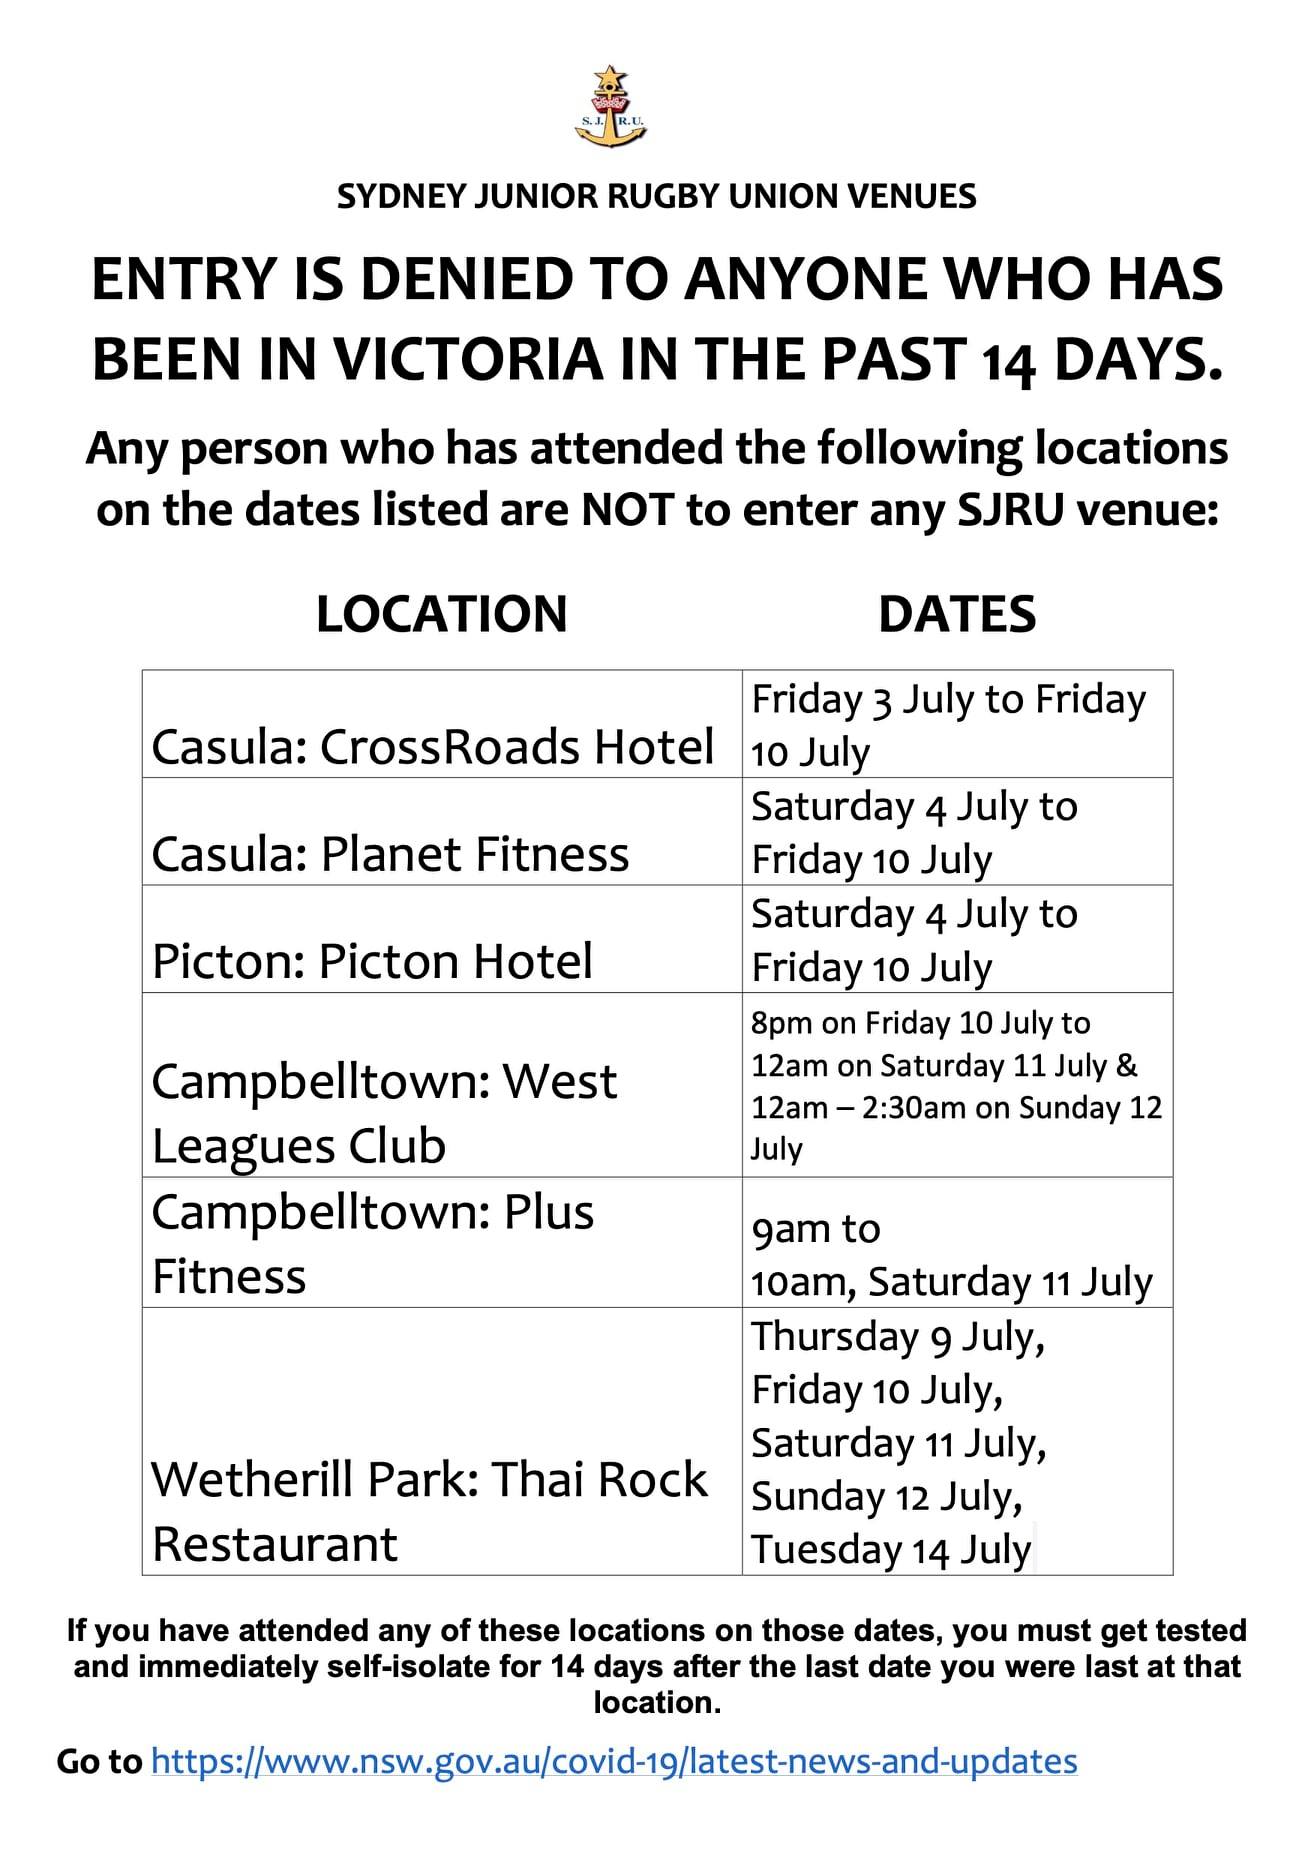 IMPORTANT: Anyone who has been to Victoria or any of these locations in the last...